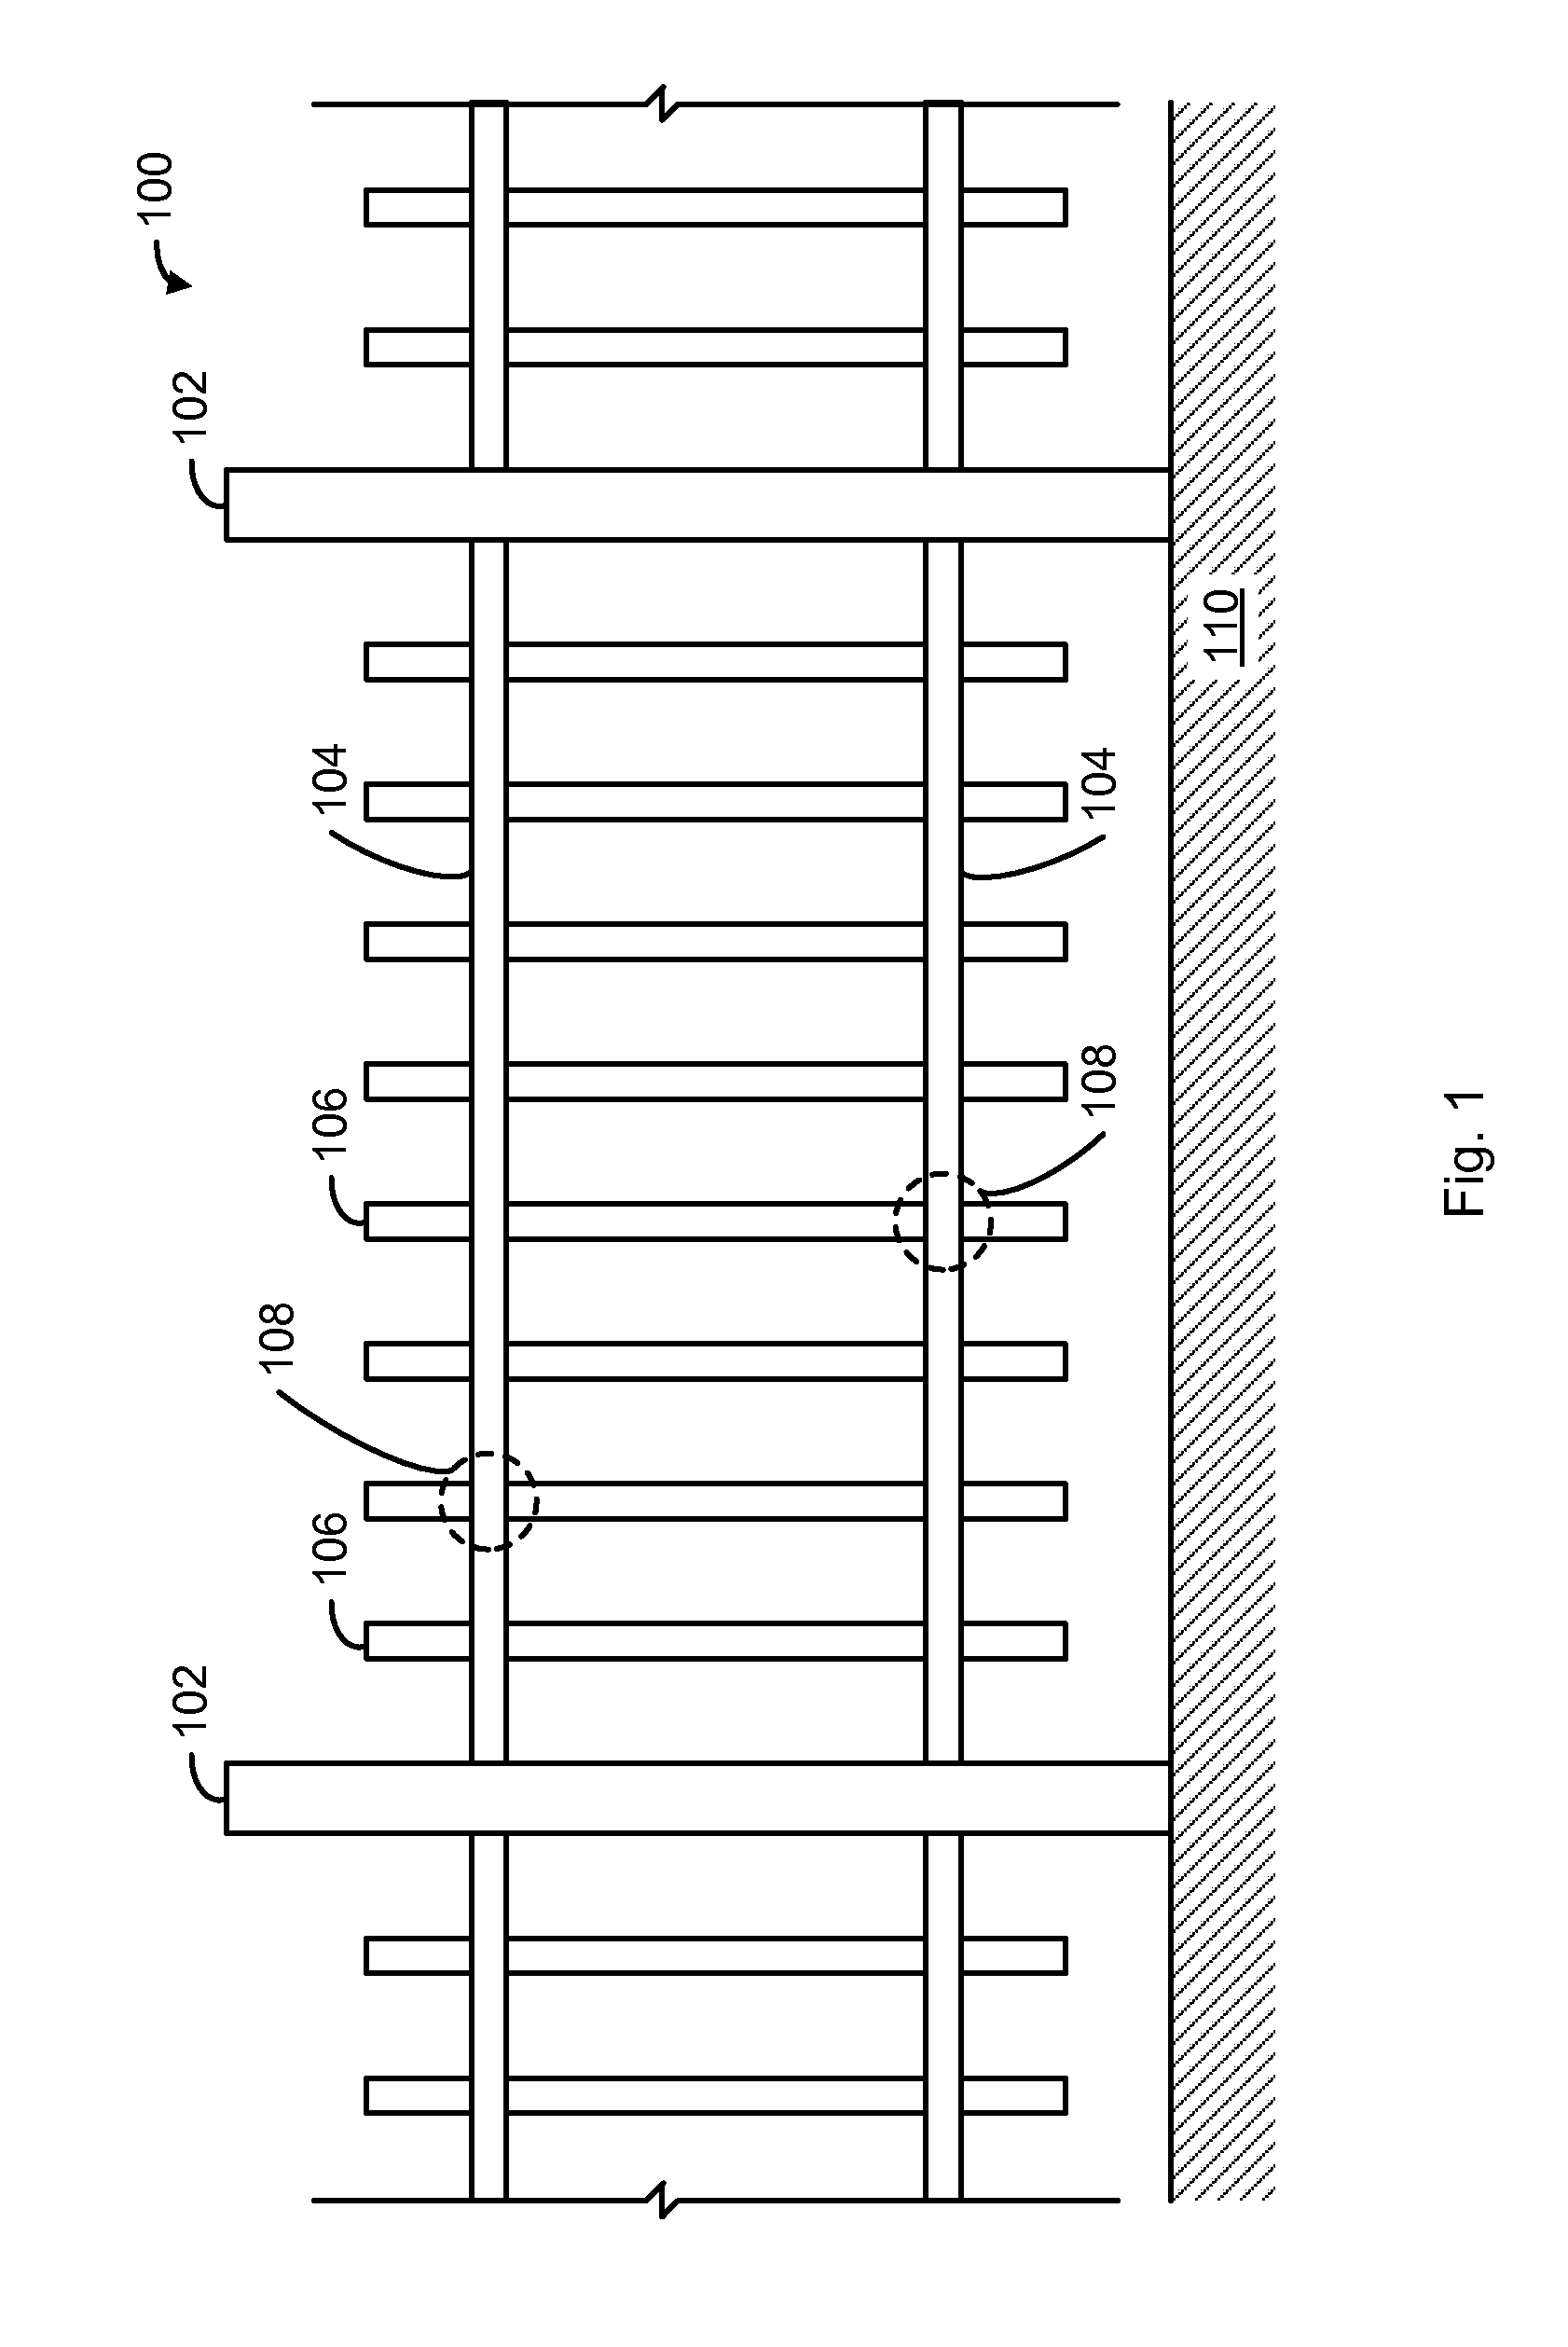 System, method and Apparatus for Assembling a Picket Fence